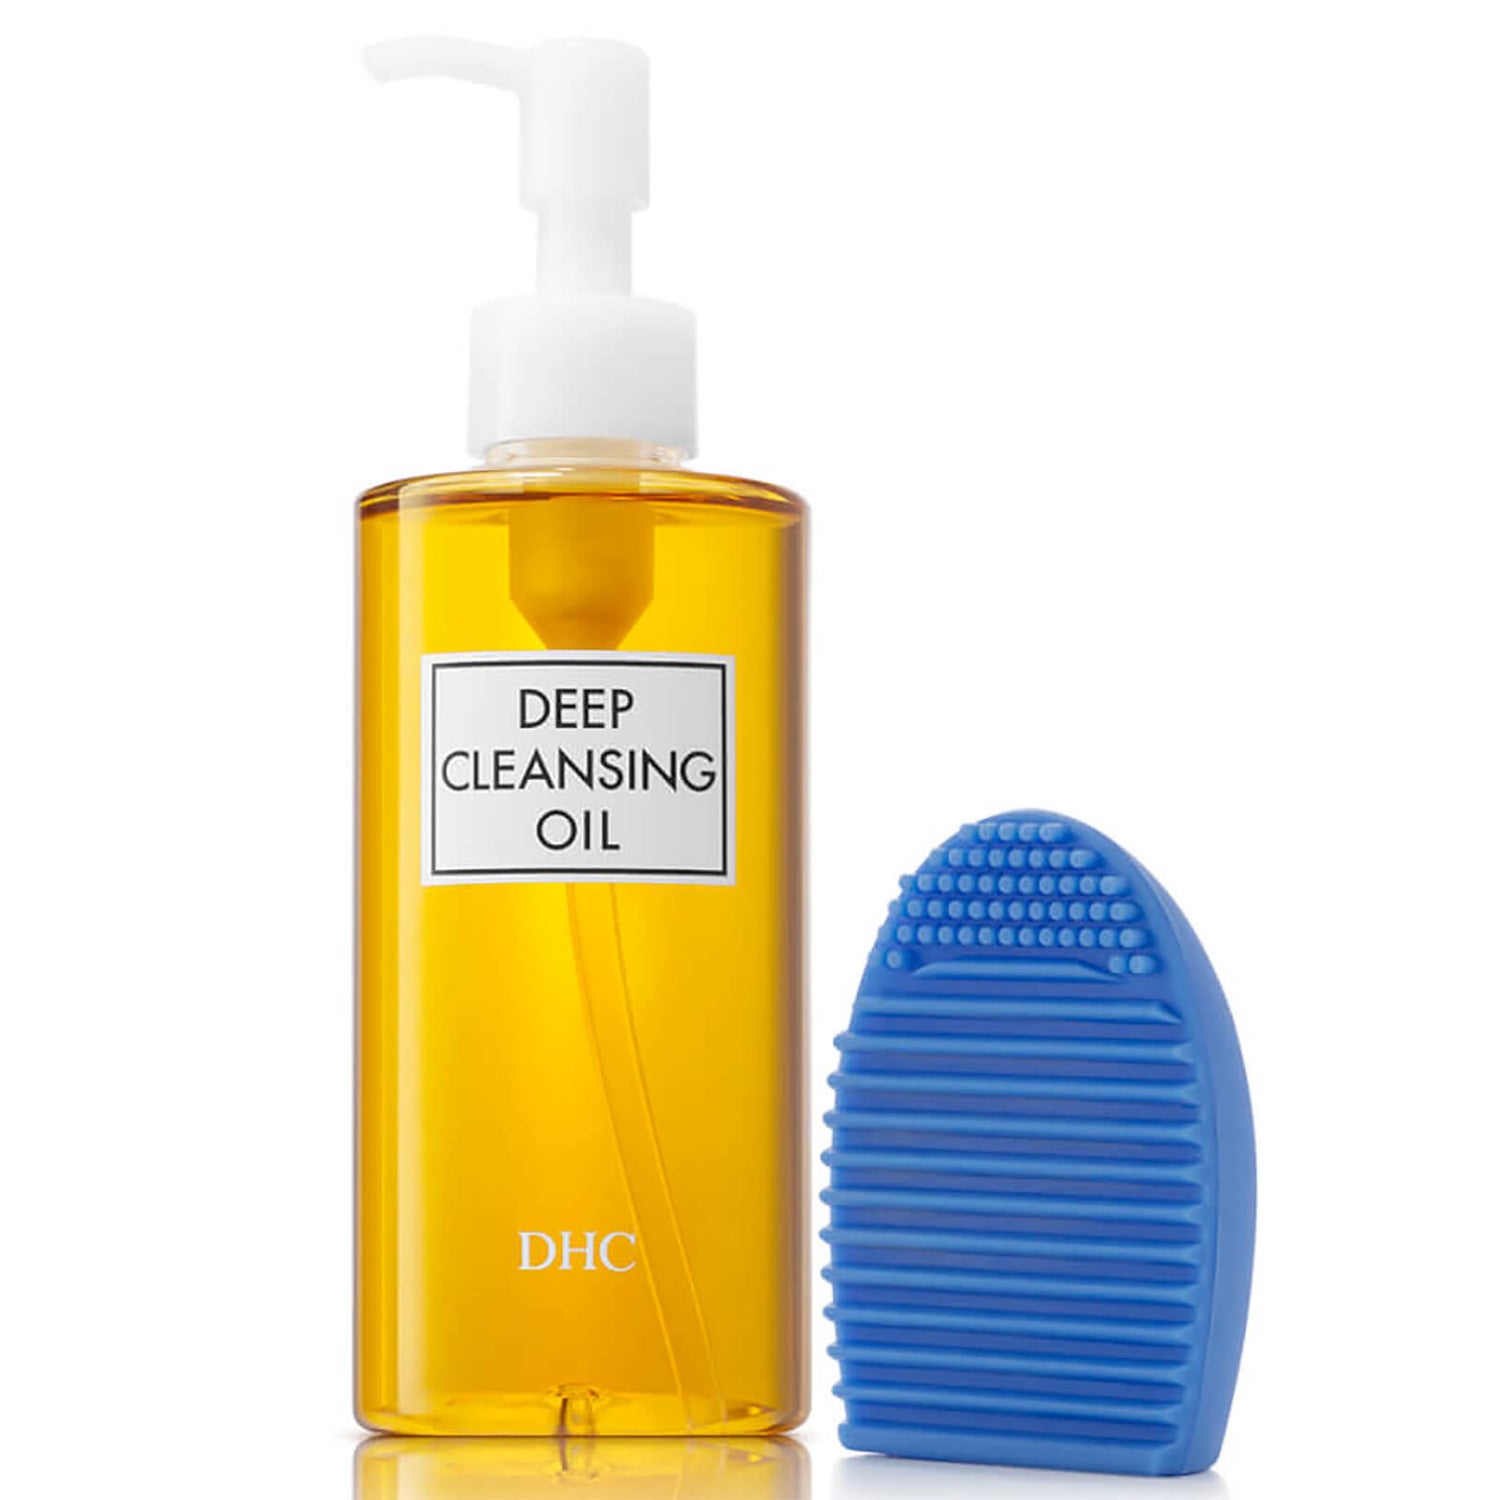 Zestaw upominkowy DHC Deep Cleansing Oil